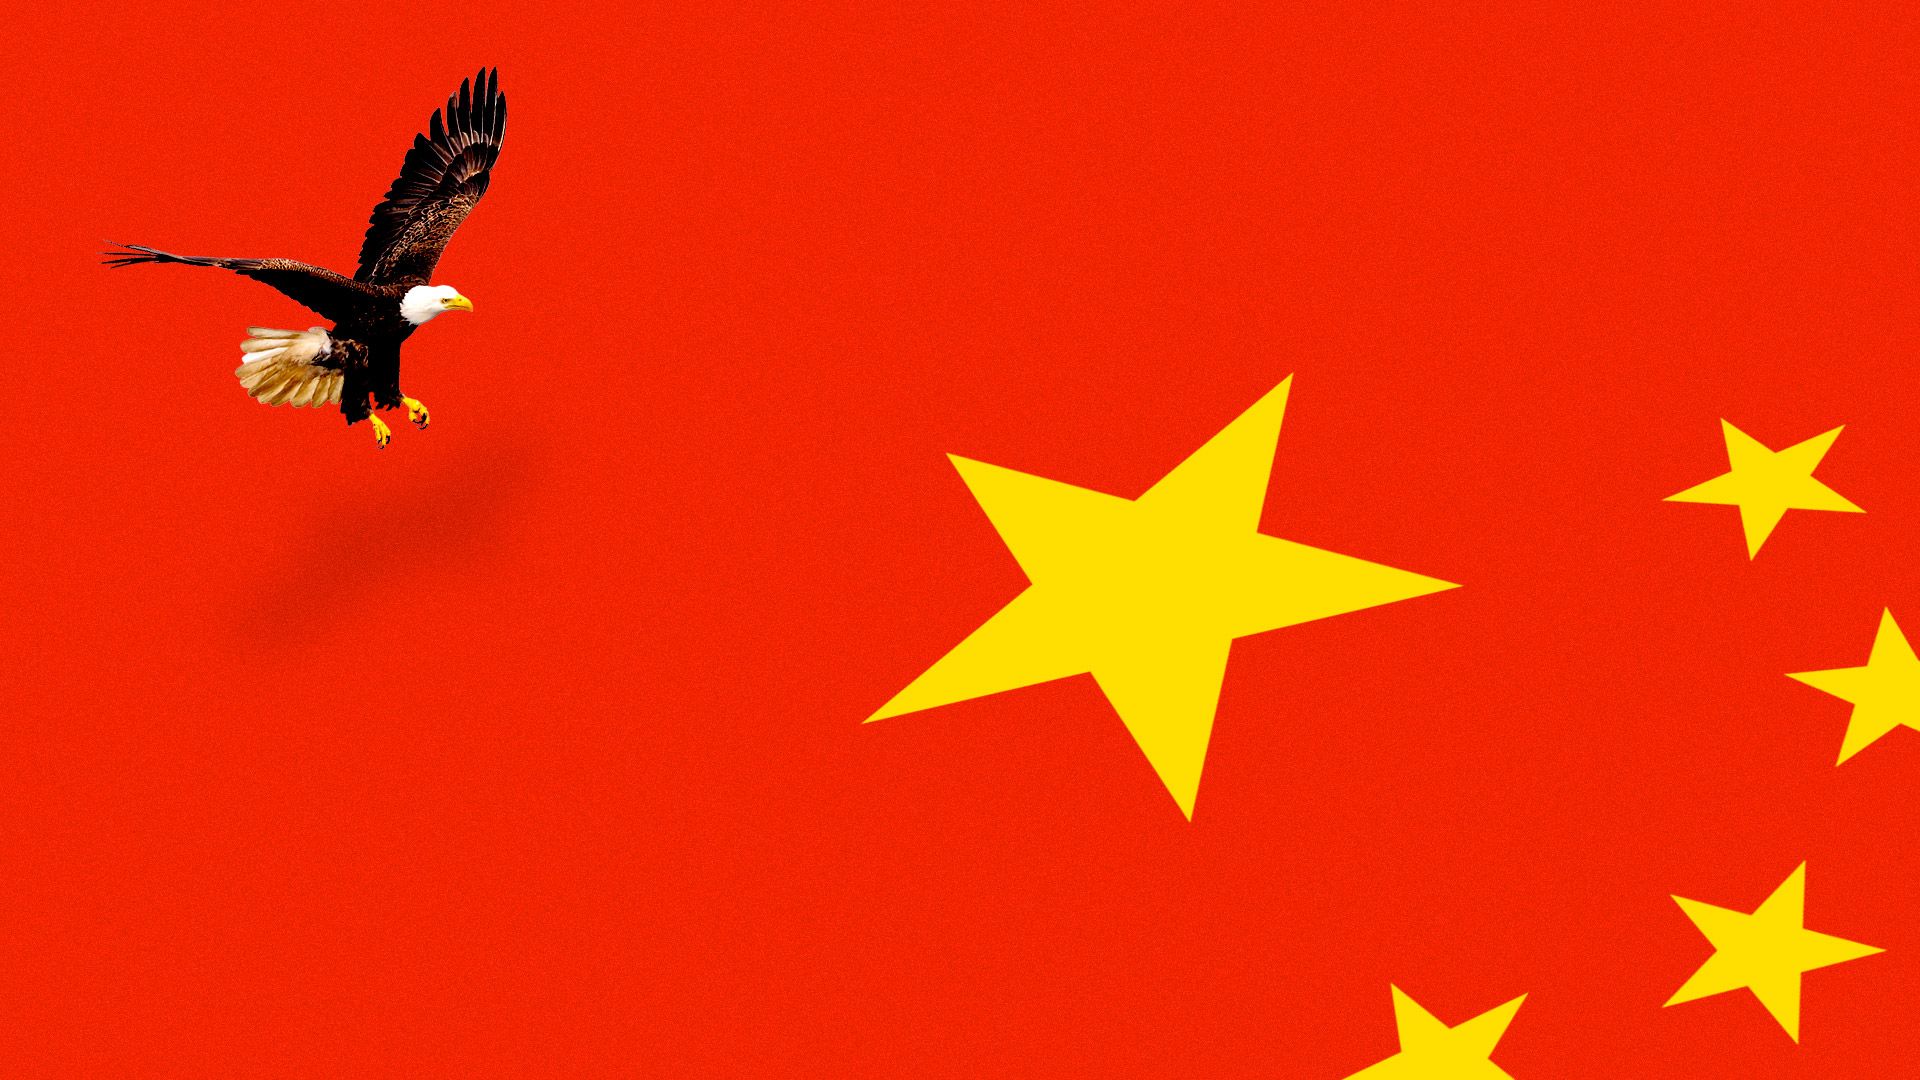 In this illustration, an American eagle flies over the Chinese flag